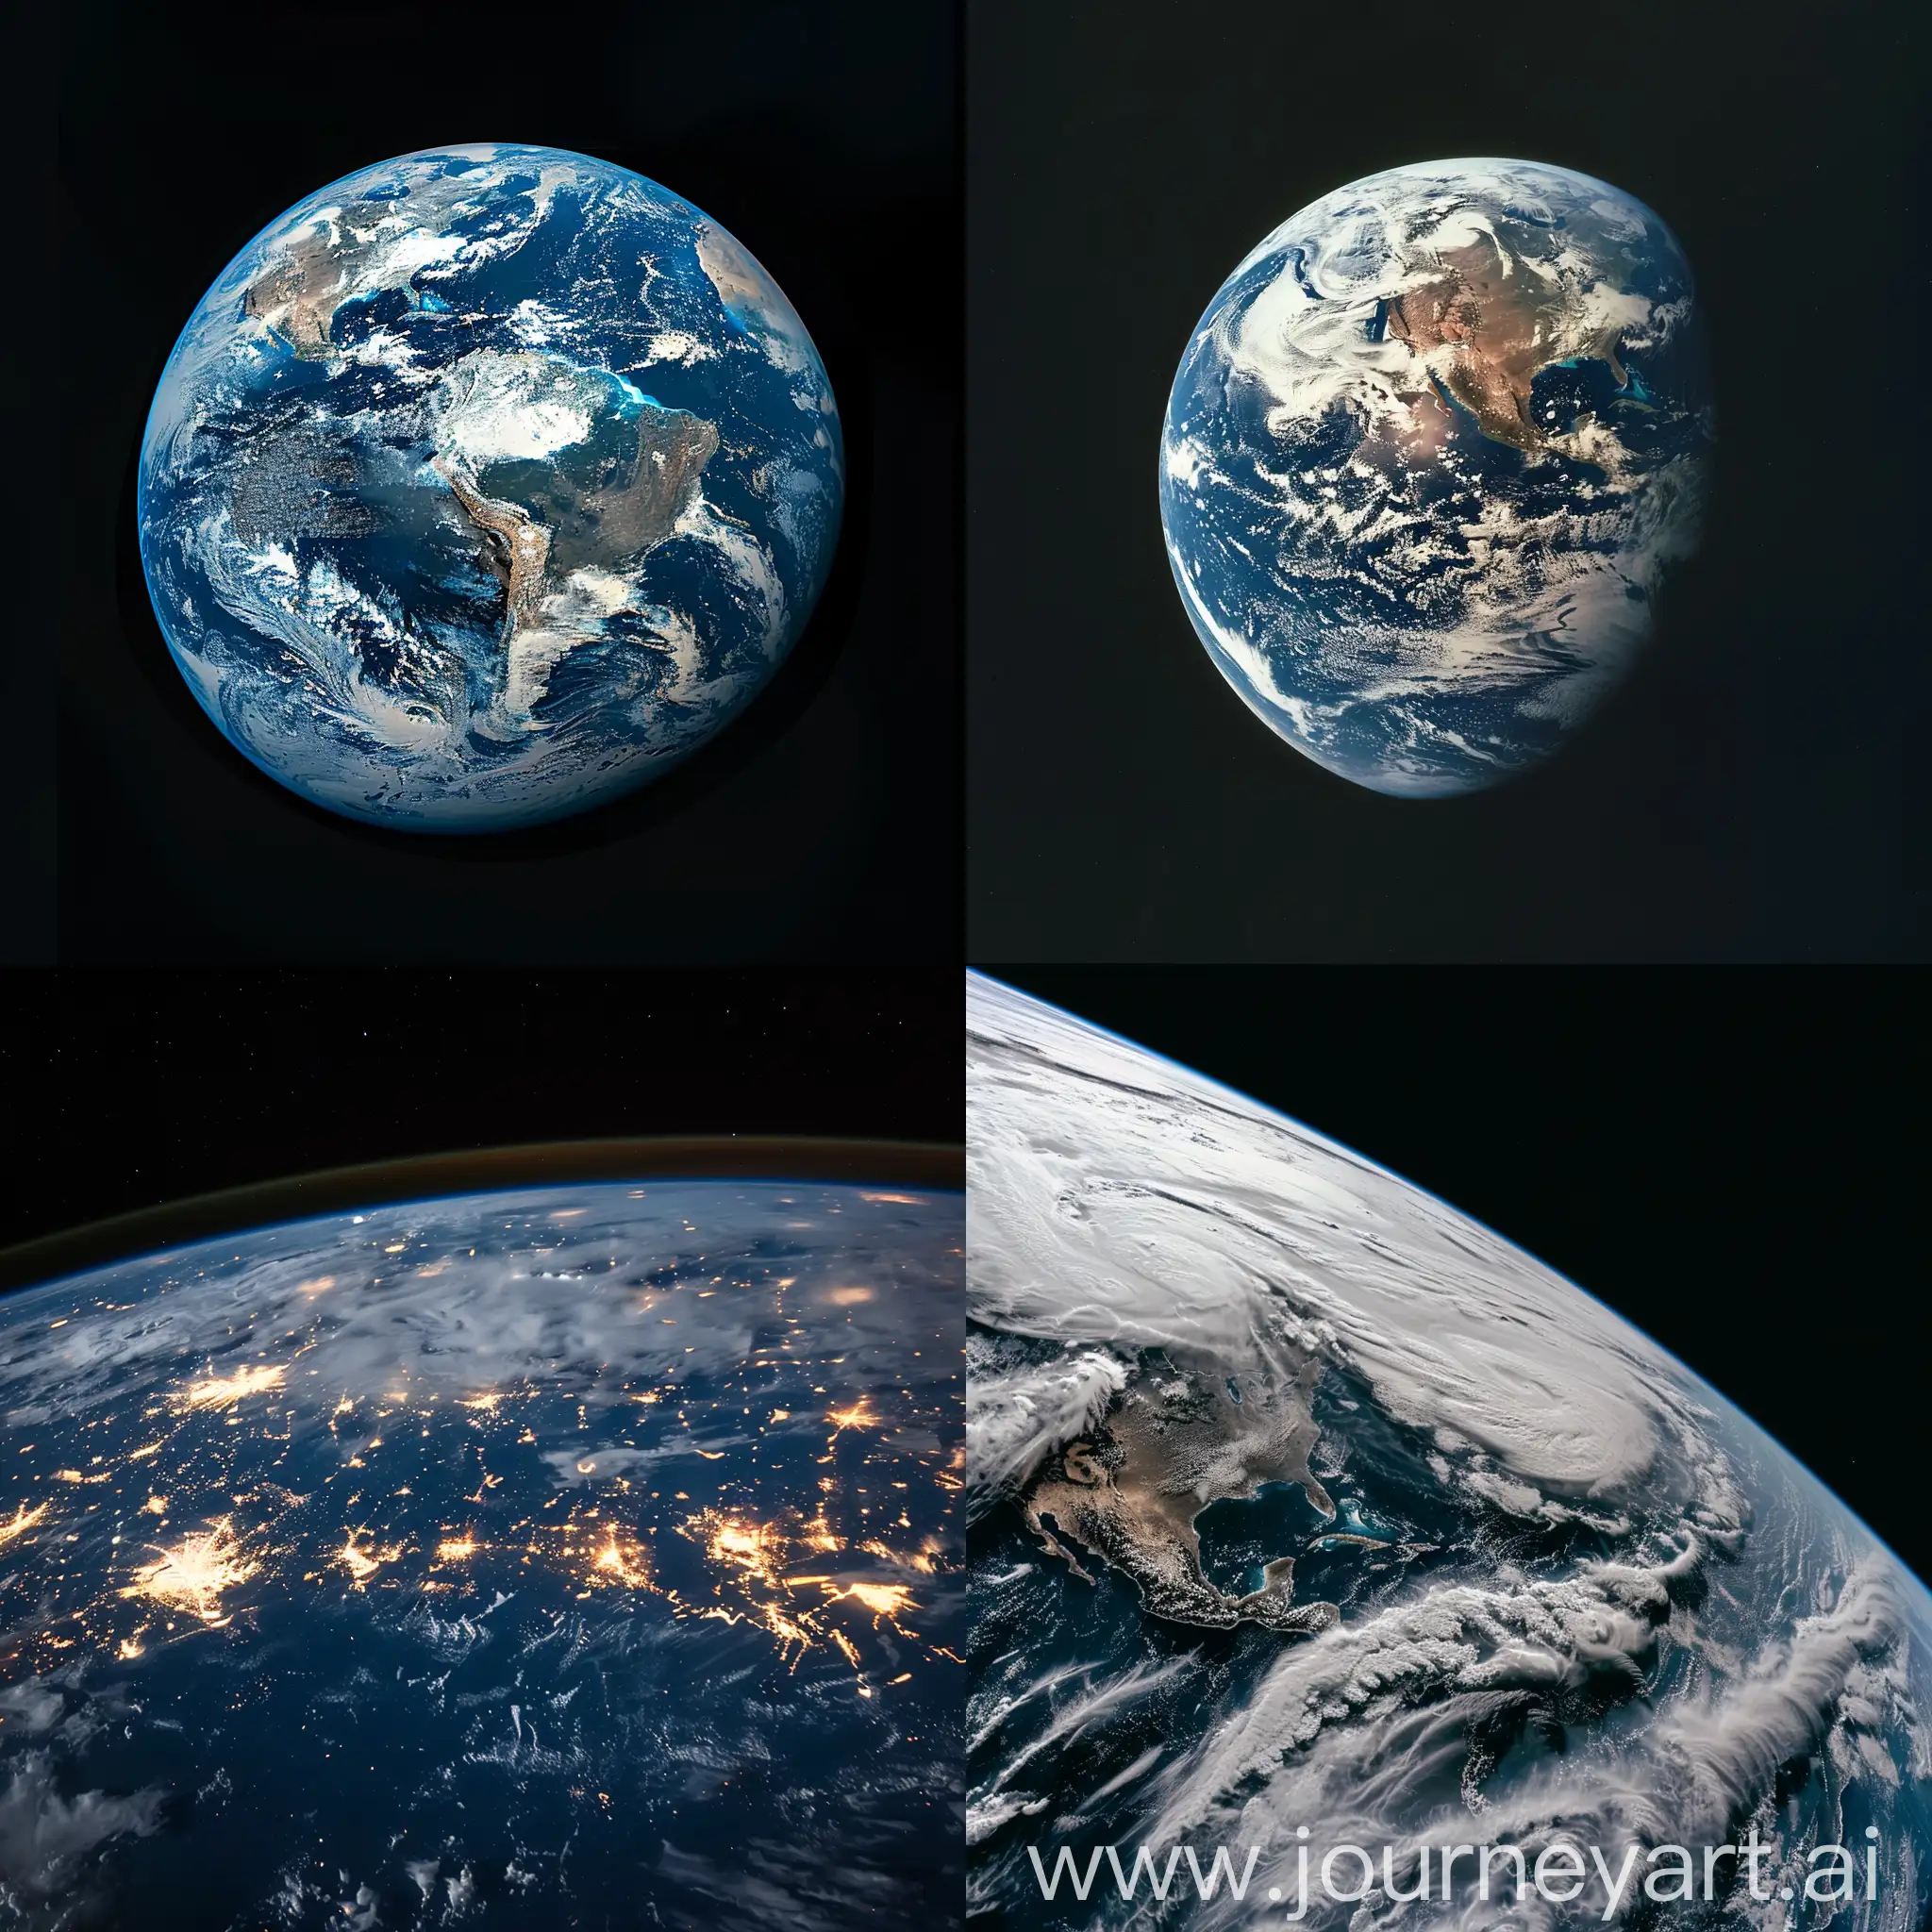 a realtime photo of the earth from space